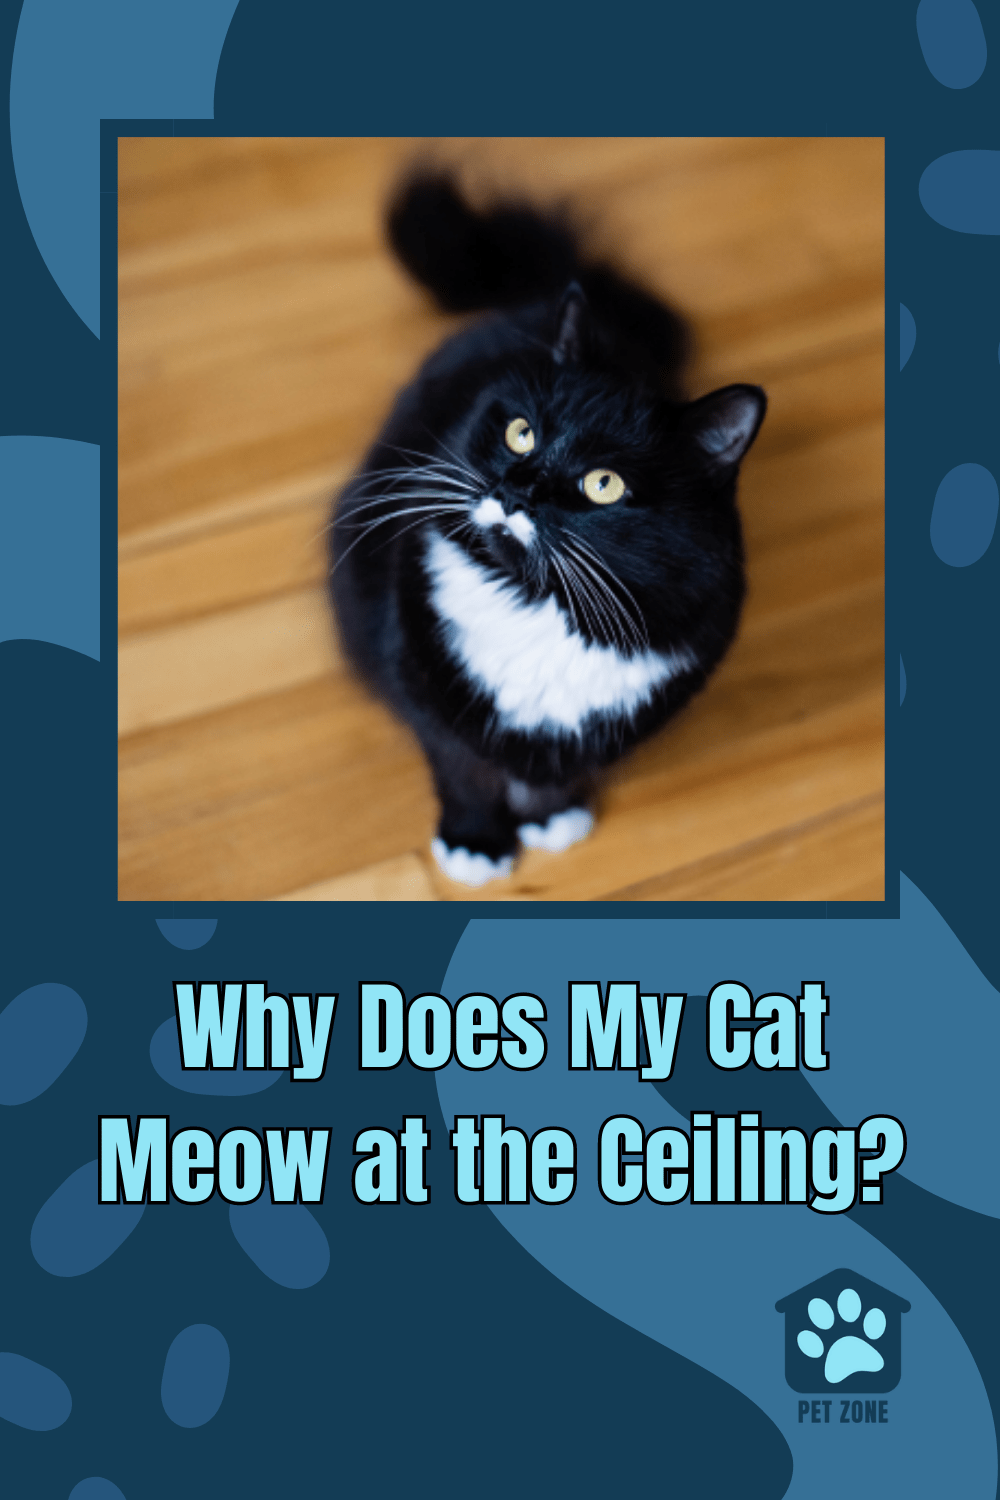 Why Does My Cat Meow at the Ceiling?